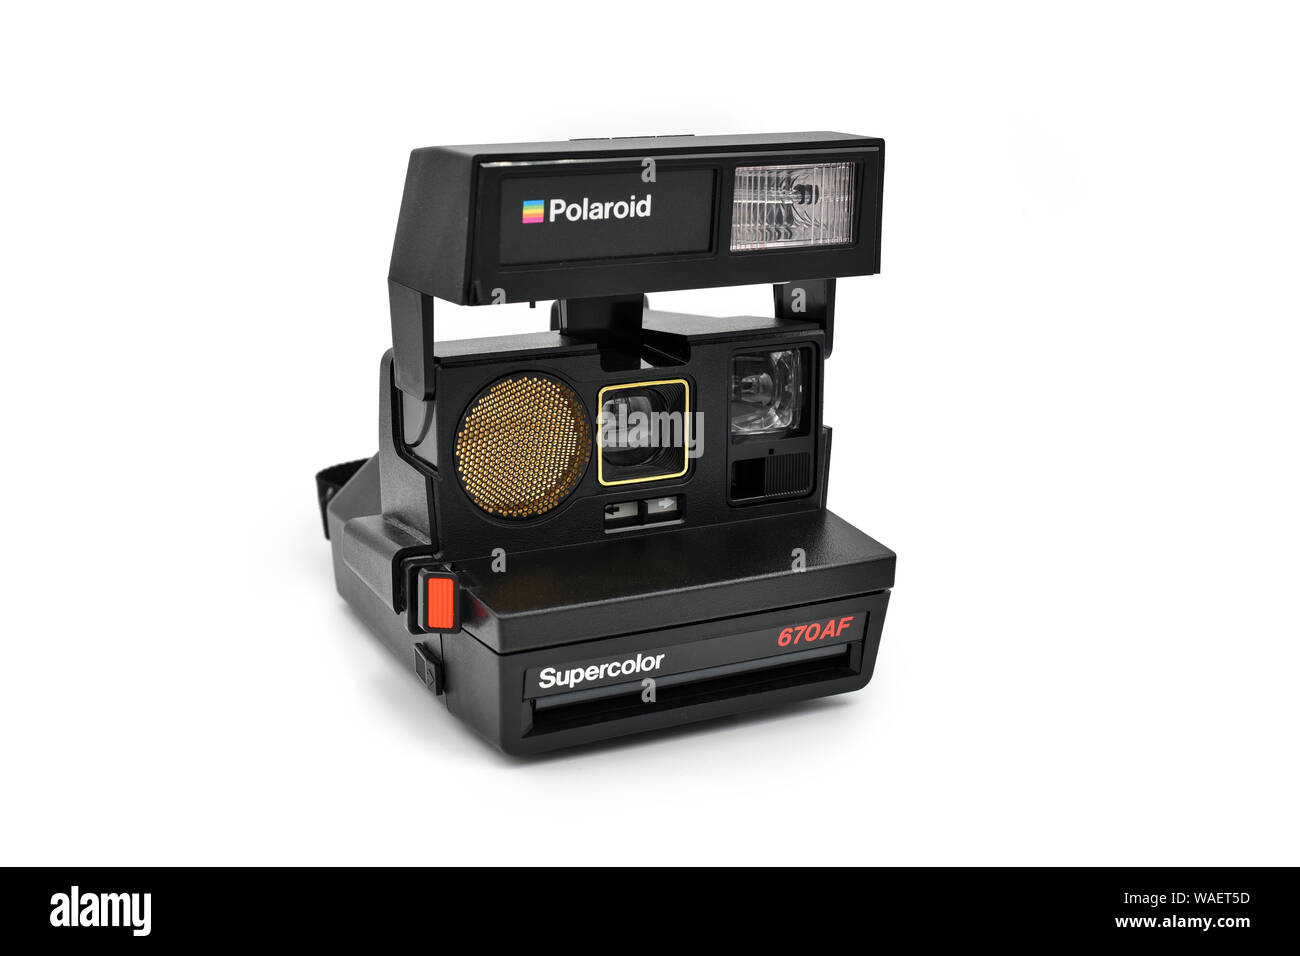 PARIS, FRANCE – AUGUST 19, 2019: Polaroid Supercolor 670 AF is a vintage  camera introduced in 1985 Stock Photo - Alamy